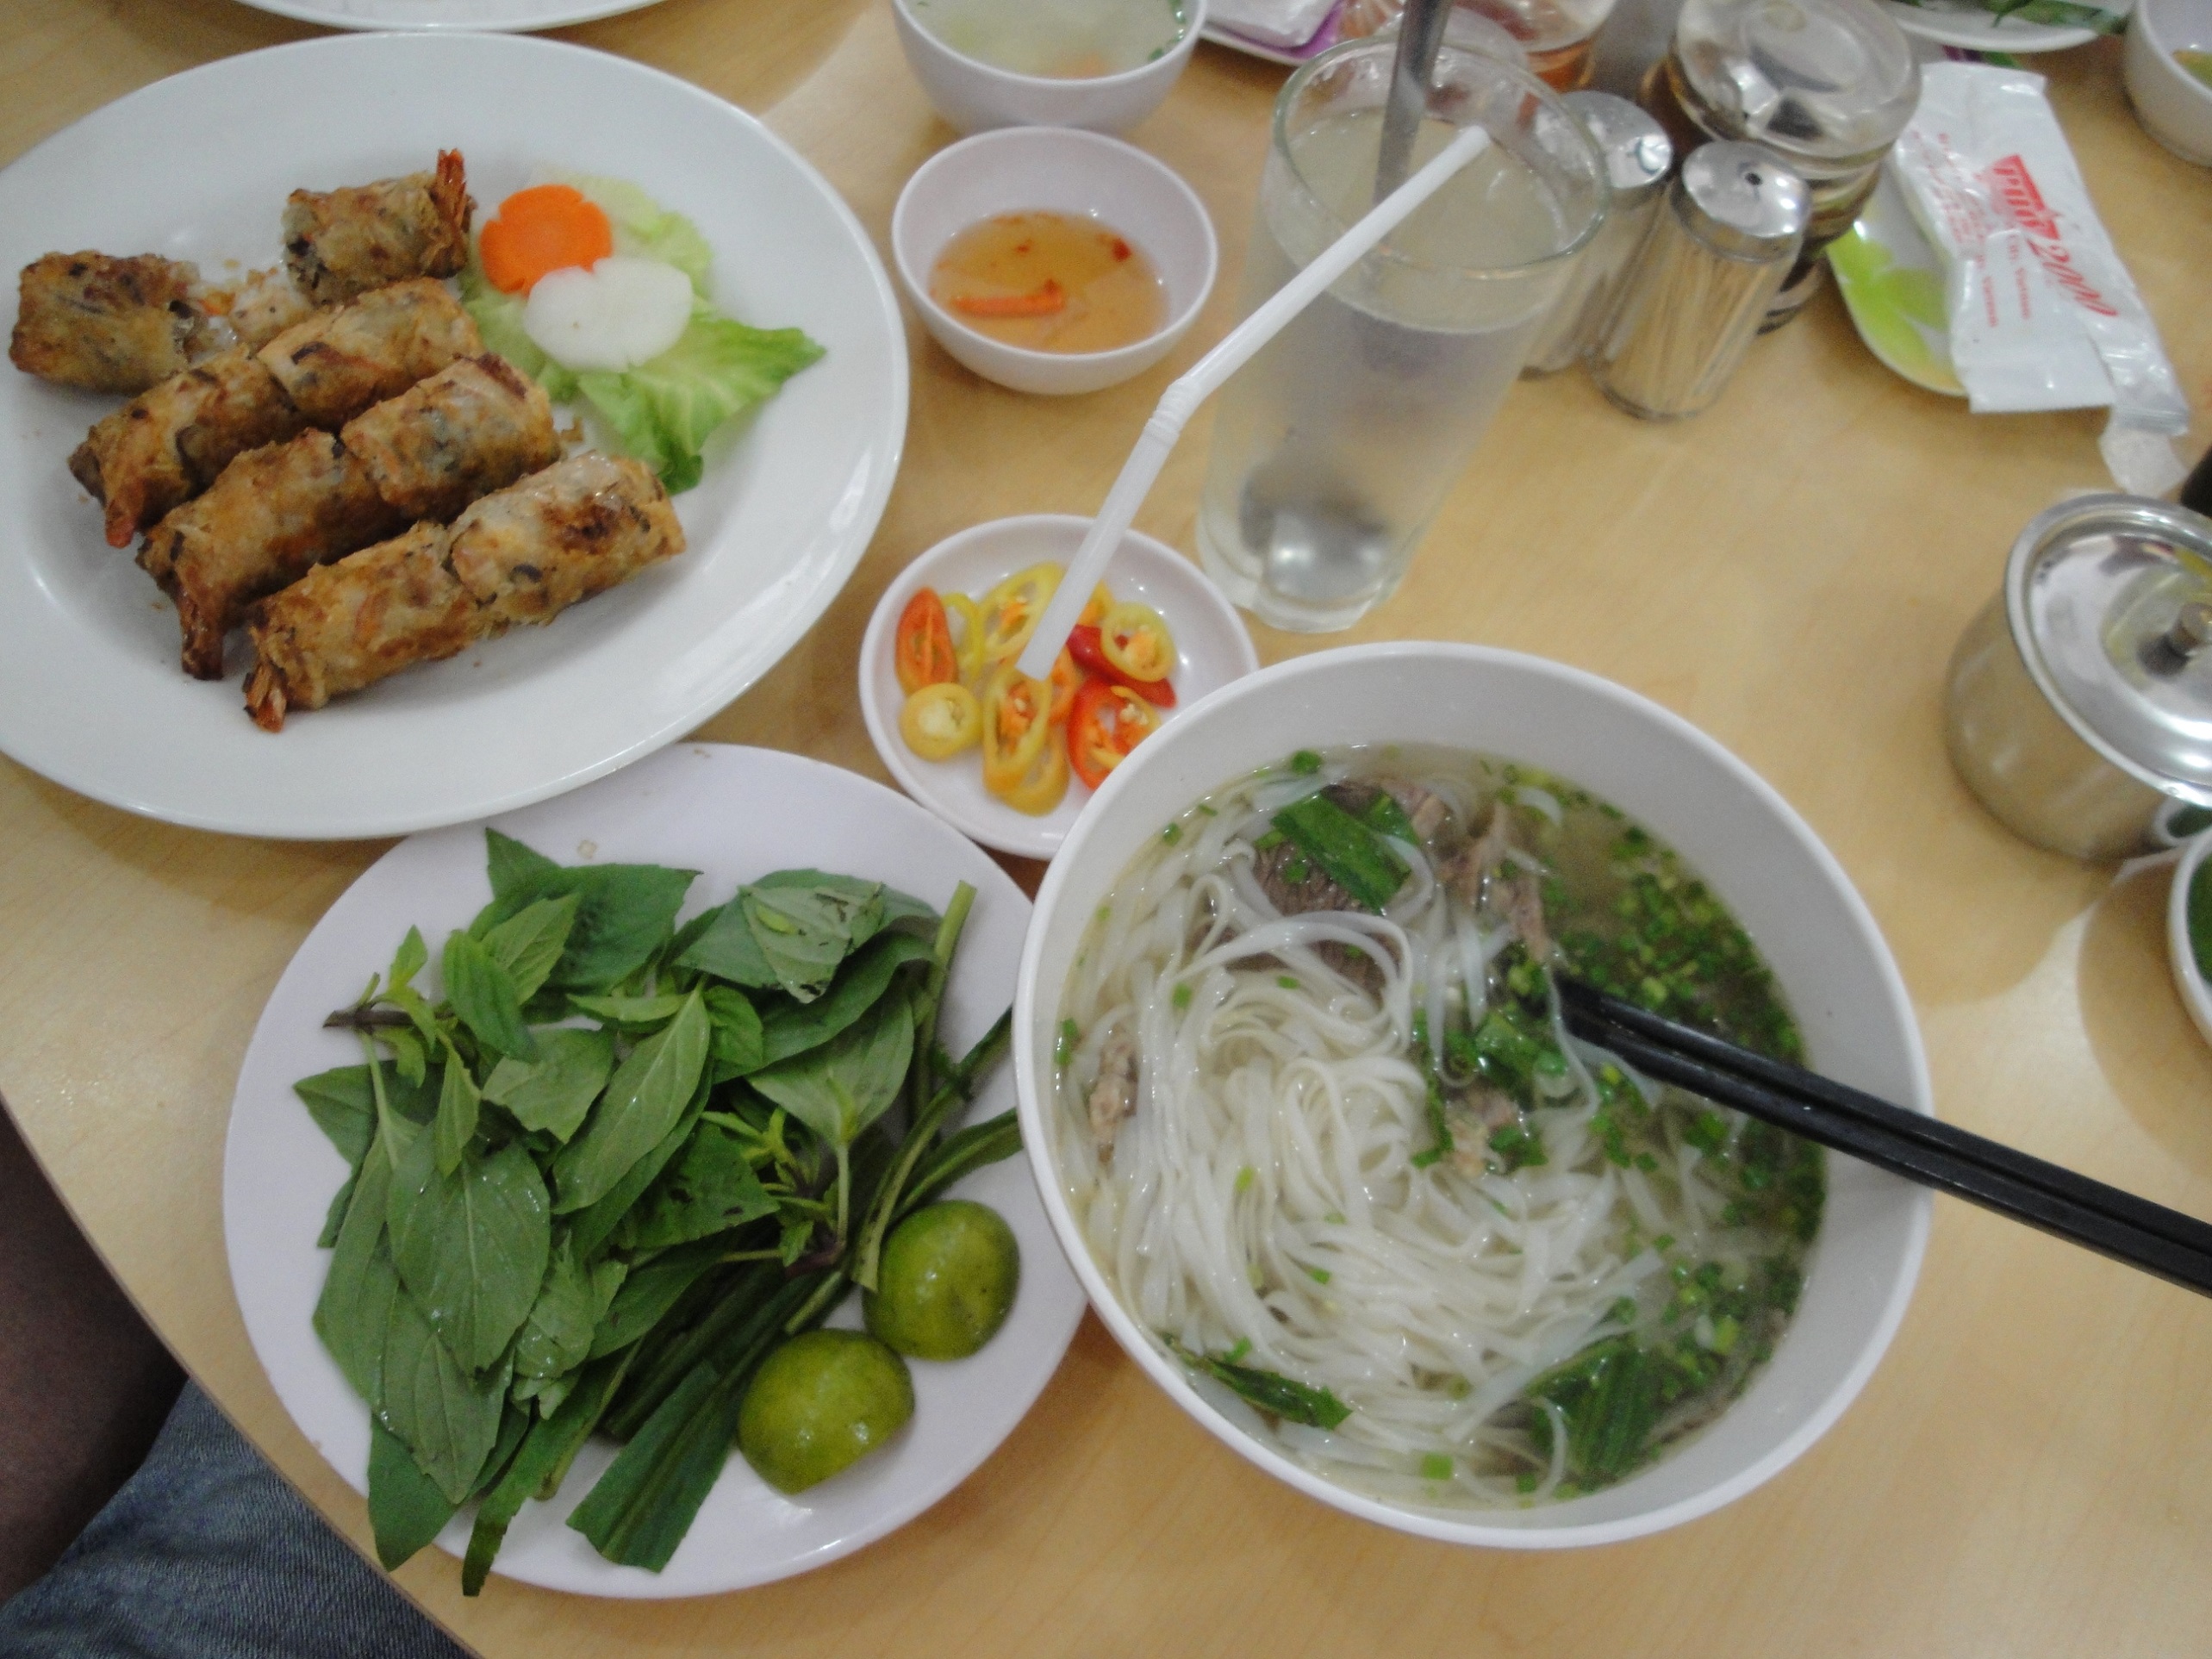 Lunch at Pho 2000 in Saigon, Ho Chi Minh City, Vietnam